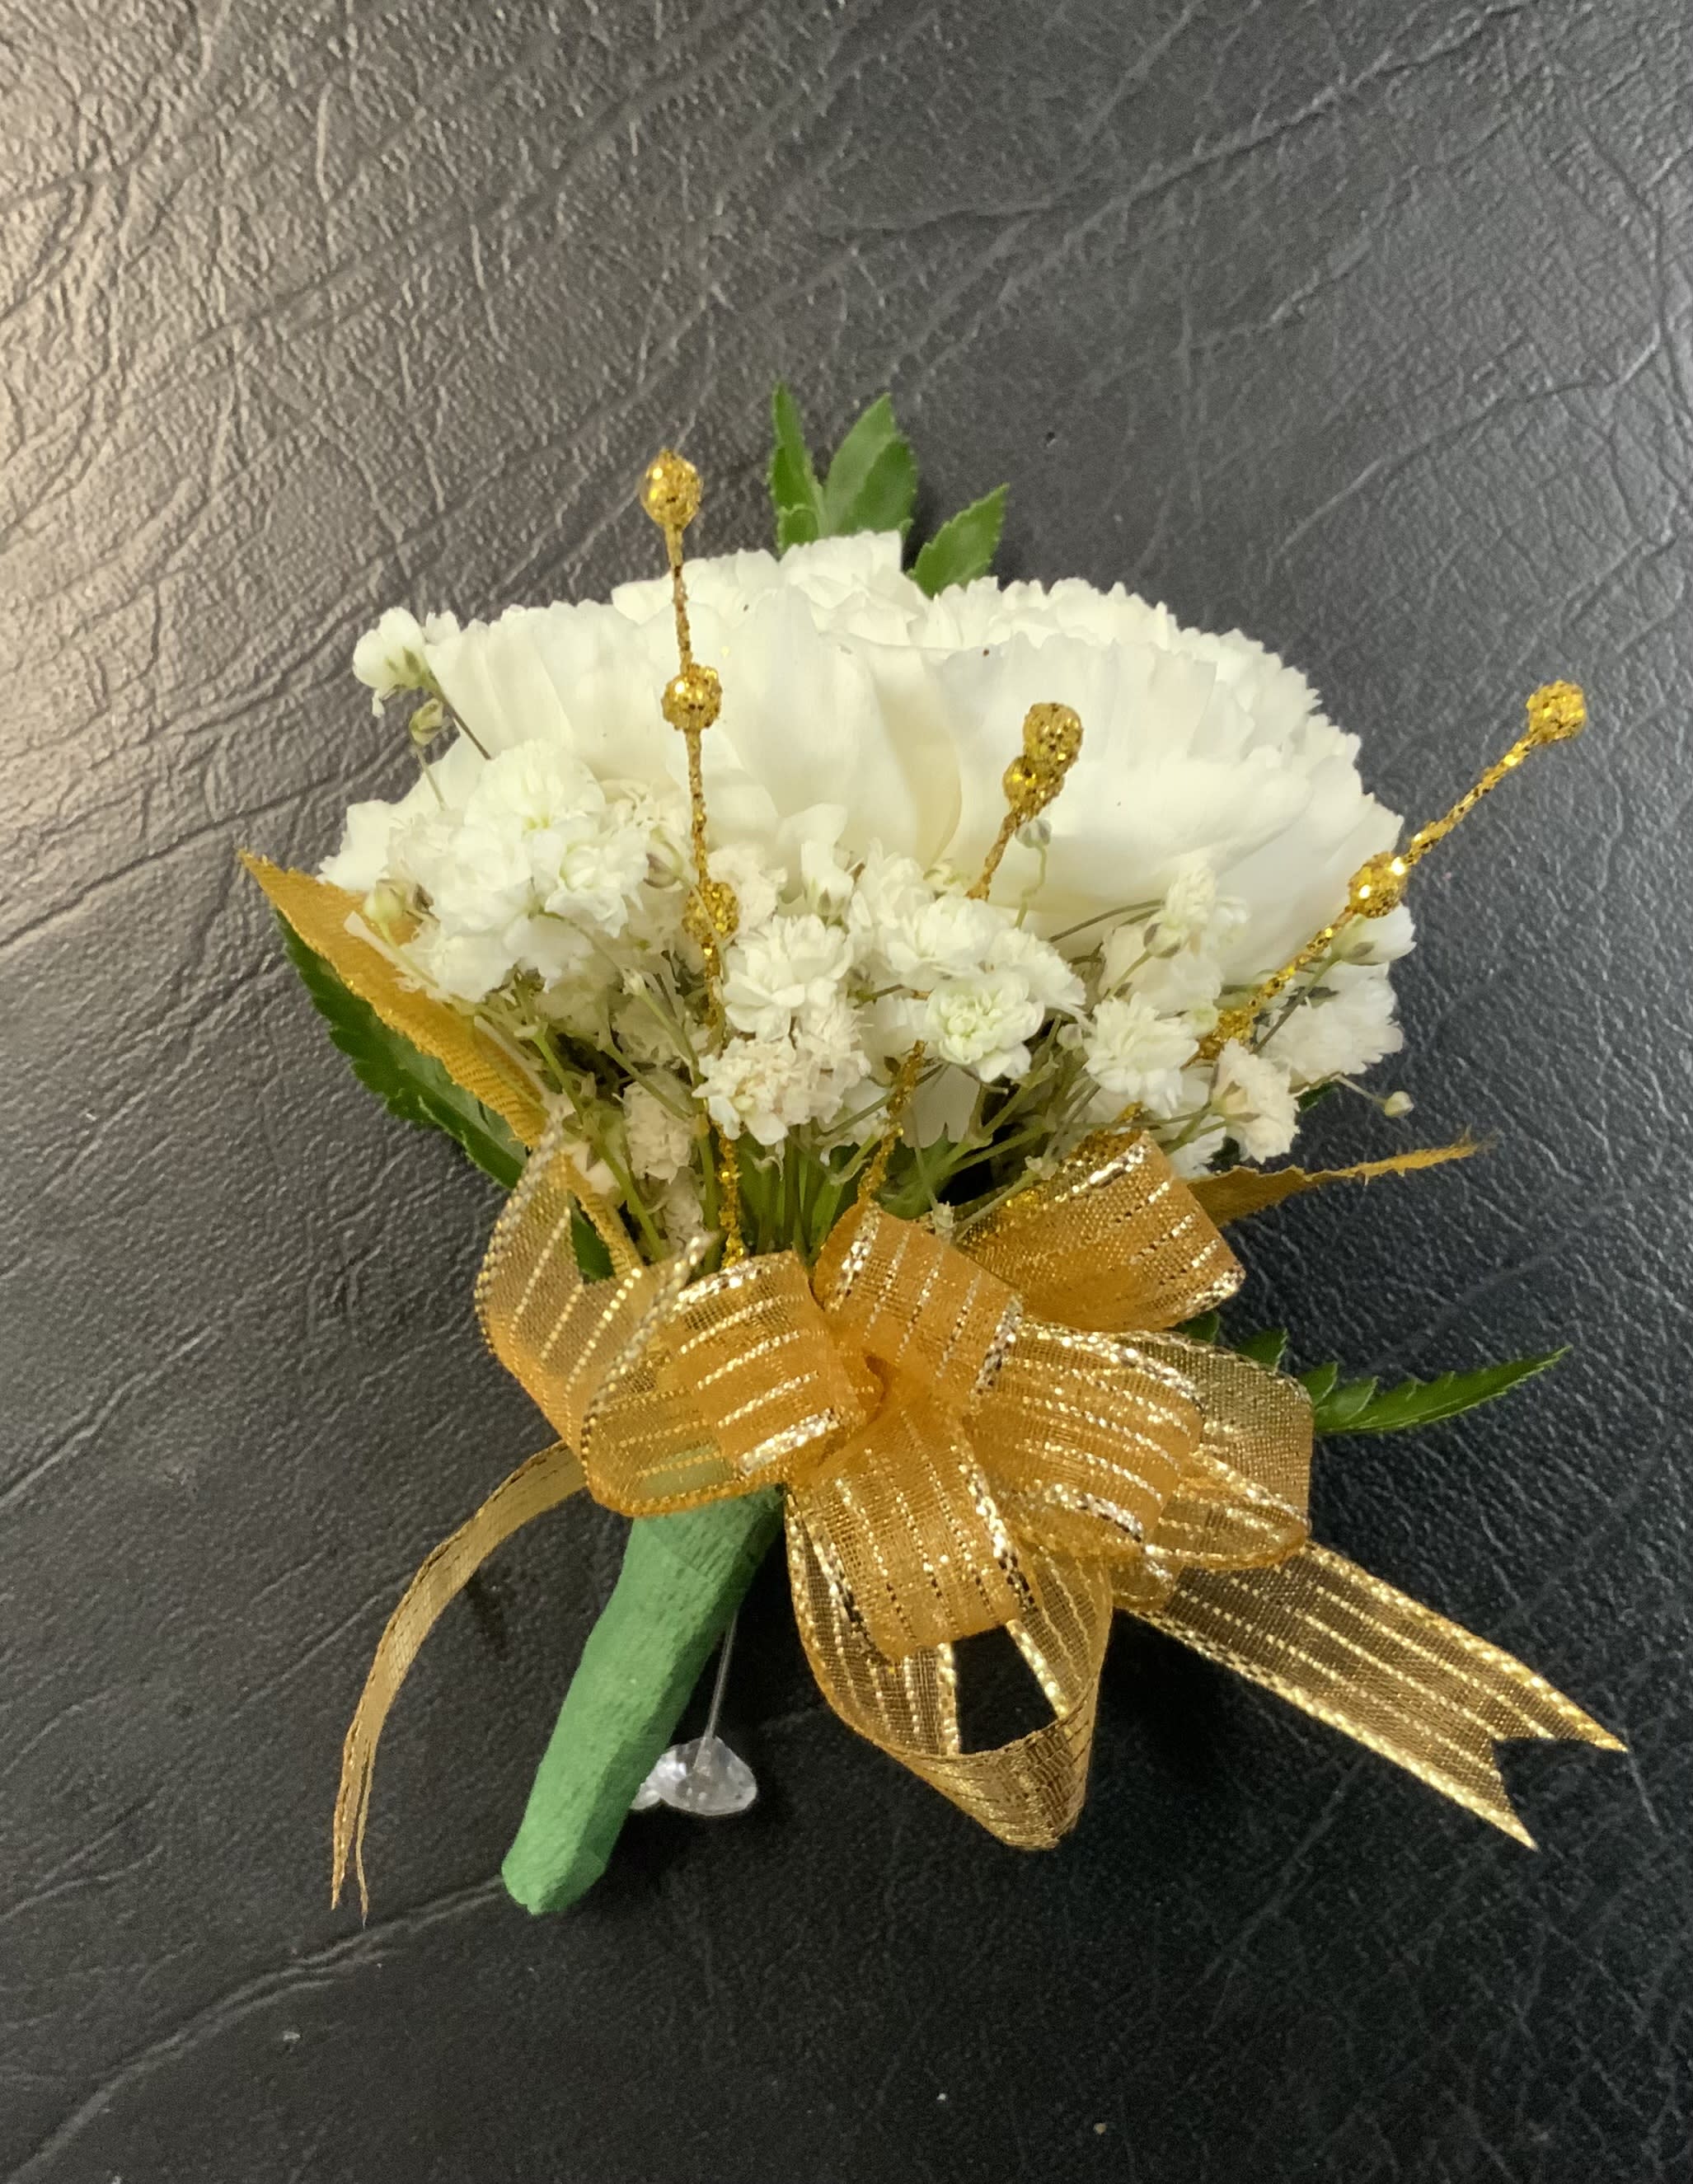 Carnation Boutonniere - It's Prom Season the perfect time to get Your Boutonniere A Different Color Carnation is available upon request. A Different Color Bow is available upon request. Beads available only in Gold, Silver or Pearls. Flower Bead available only in Gold or Silver.